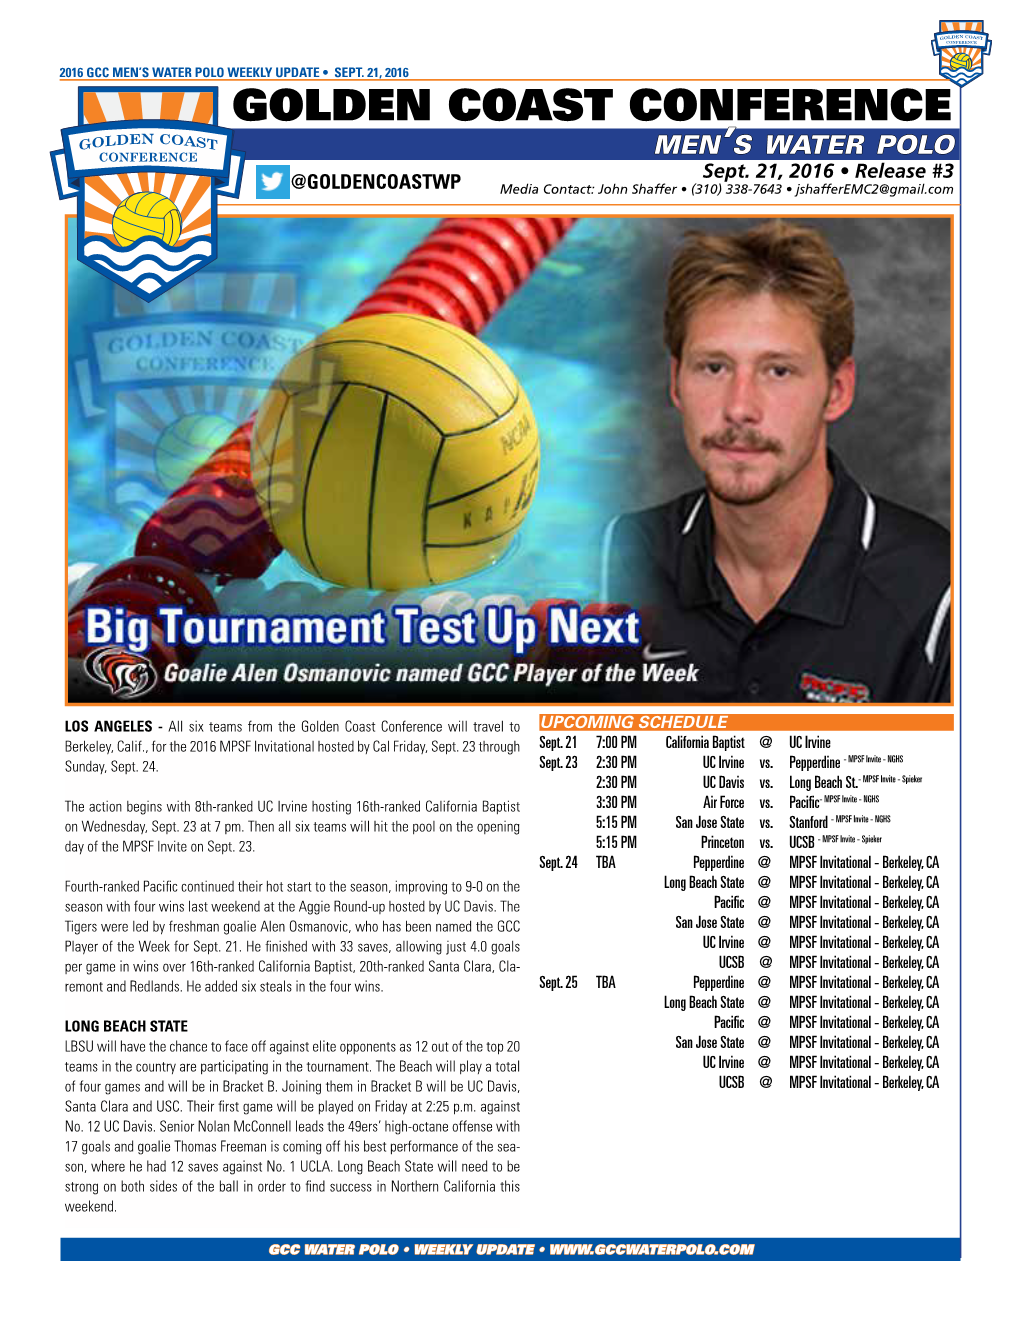 SEPT. 21, 2016 GOLDEN COAST CONFERENCE Men’S Water Polo Sept